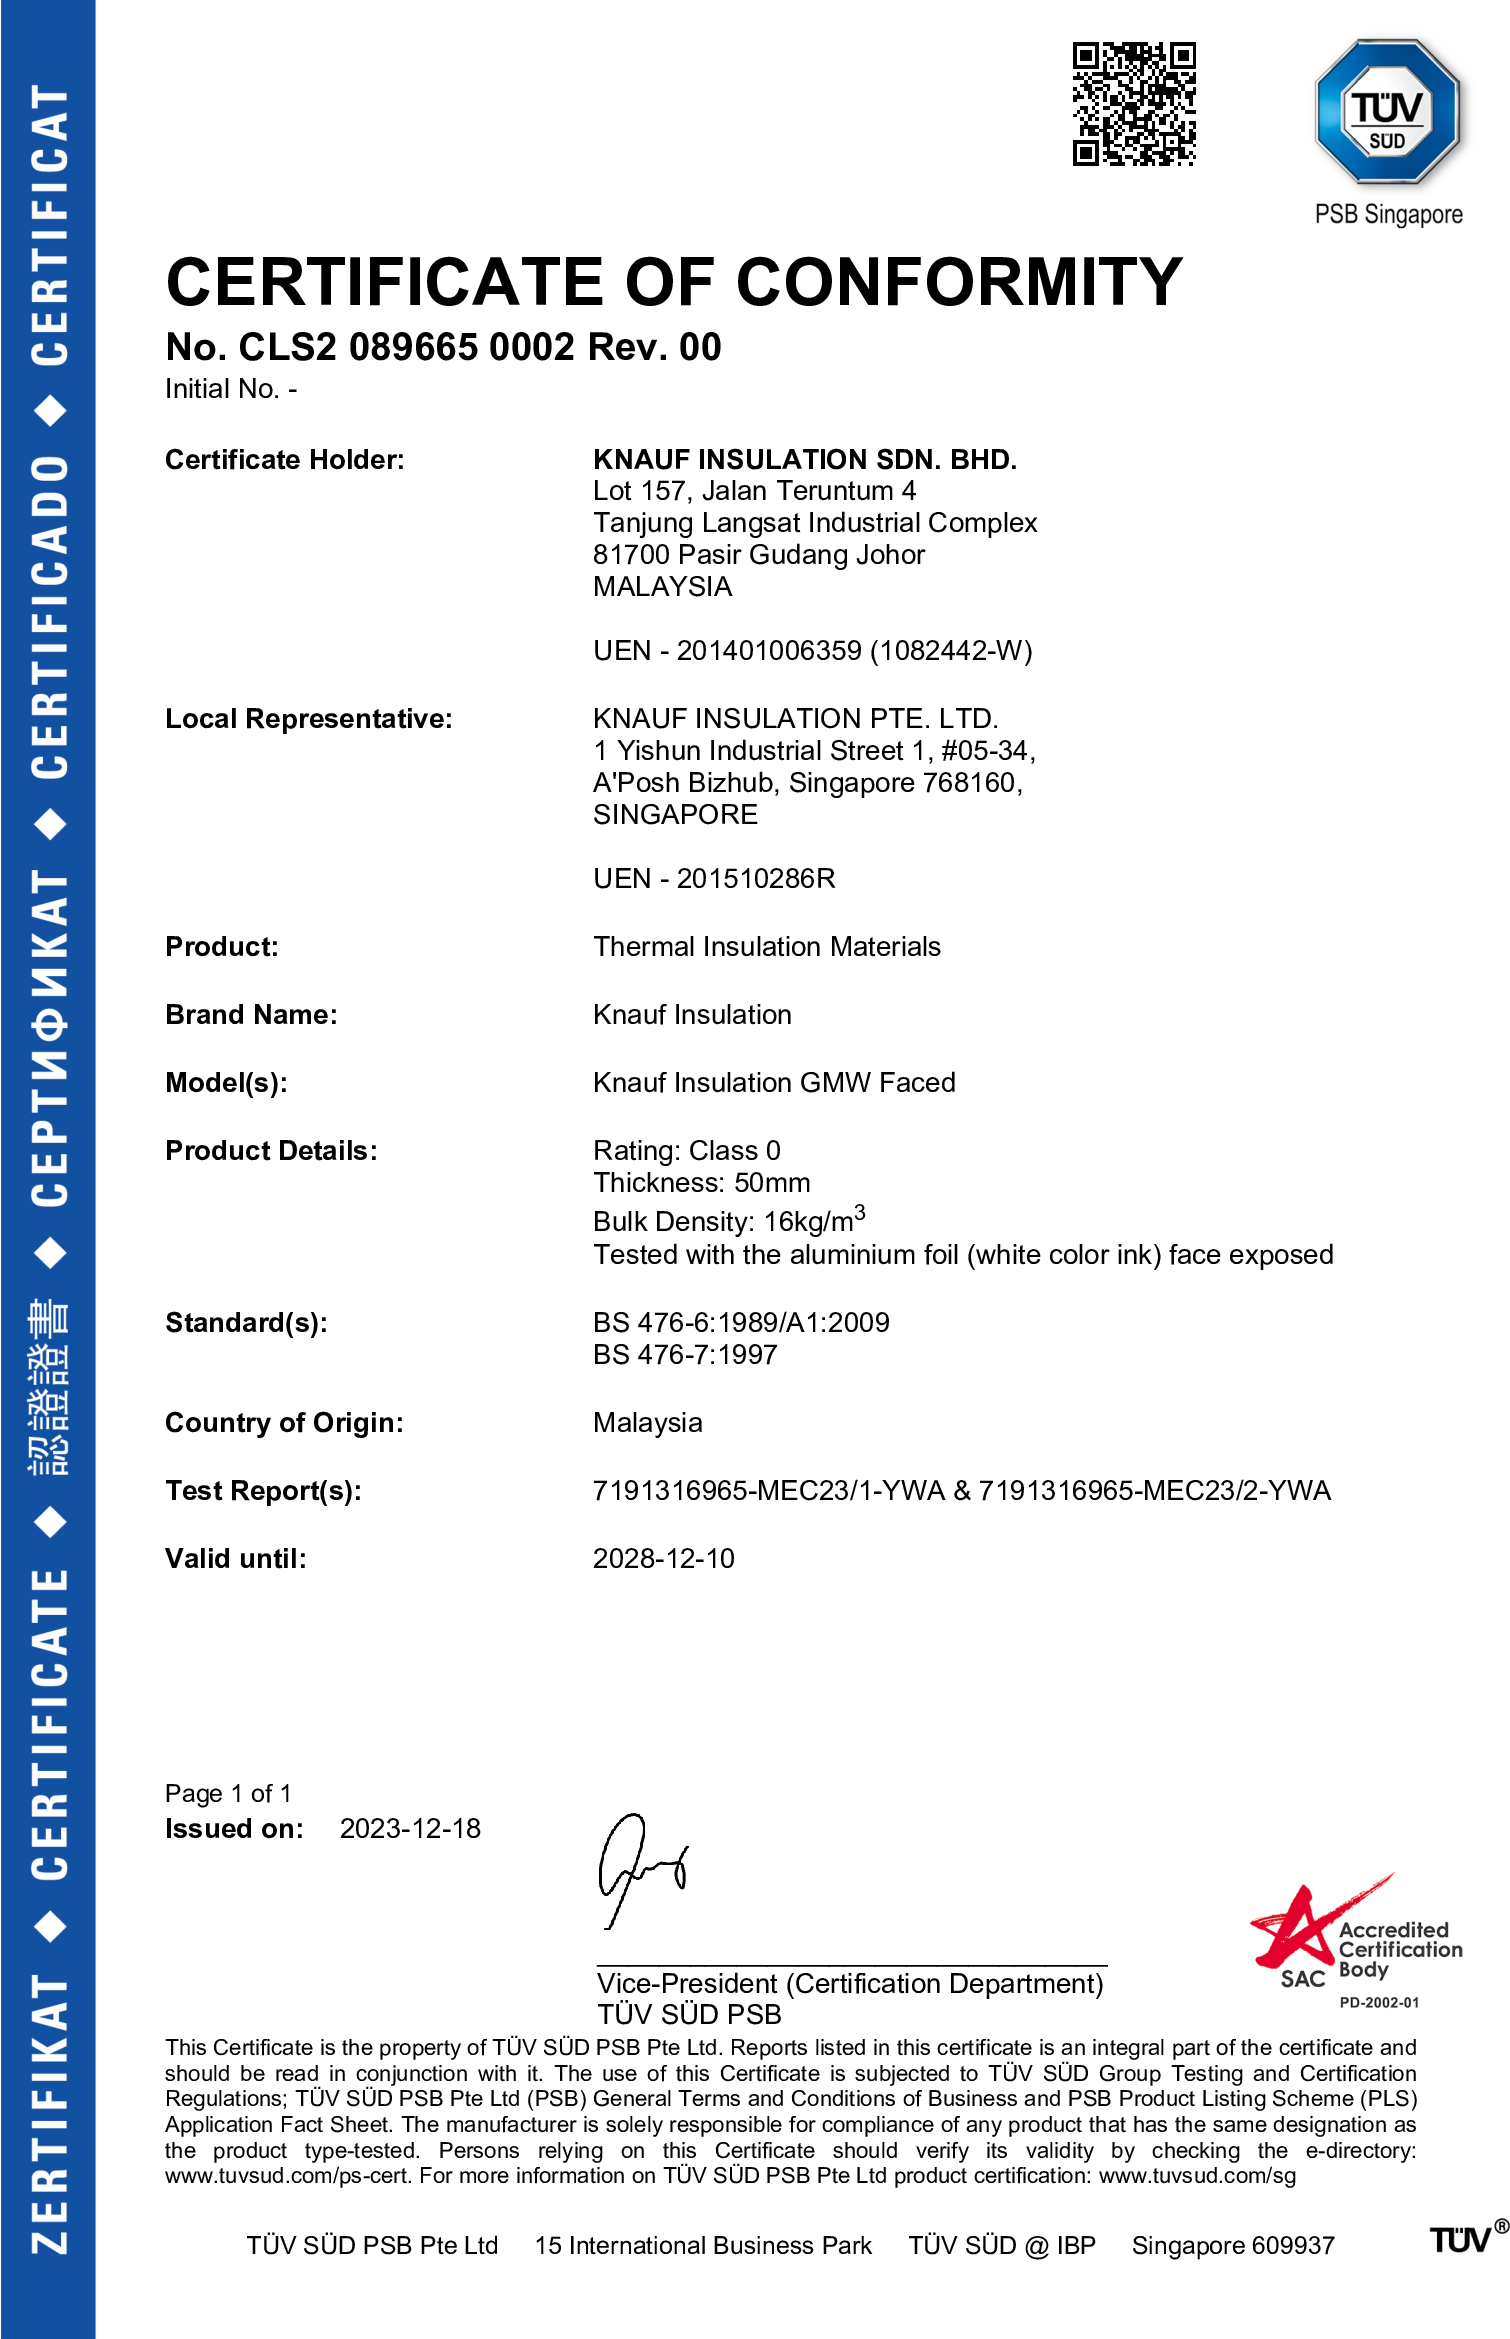 Faced Glasswool – Certificate of Conformity – 16kg/m3_50mm_ BS476-Part 6 & 7